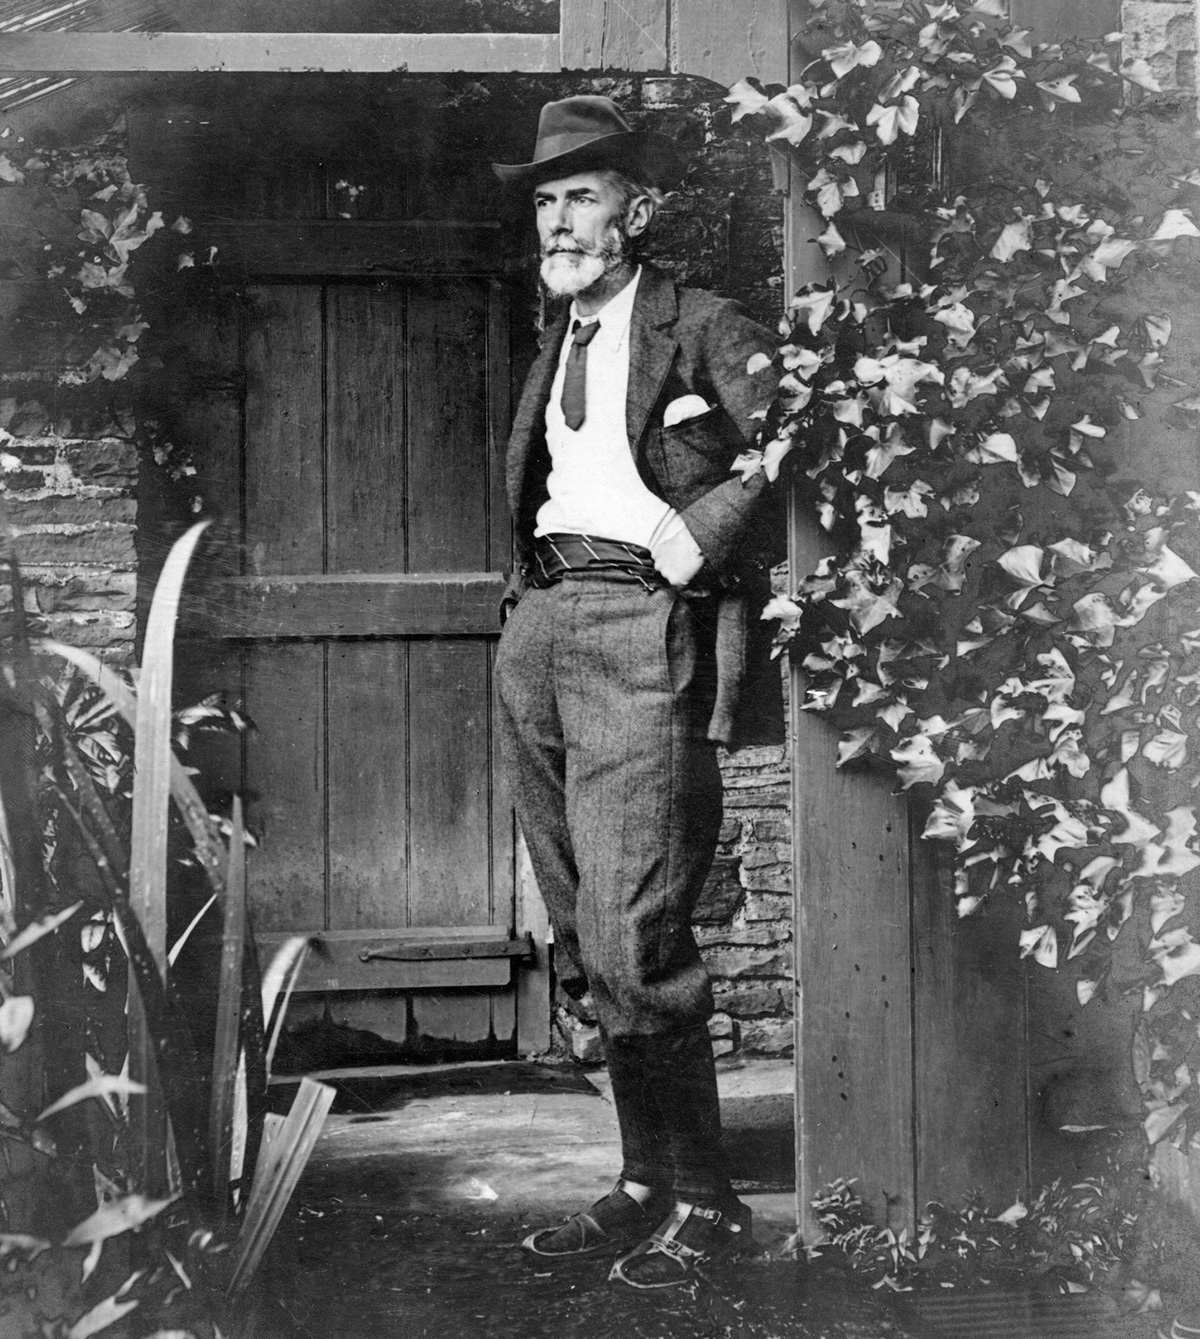 A 1905 photograph of Edward Carpenter standing outside his cottage in Millthorpe, Derbyshire. He is wearing a pair of his famous Indian-style sandals, which he made himself, and a jacket, knickerbockers, cravat, and cummerbund of his own design.